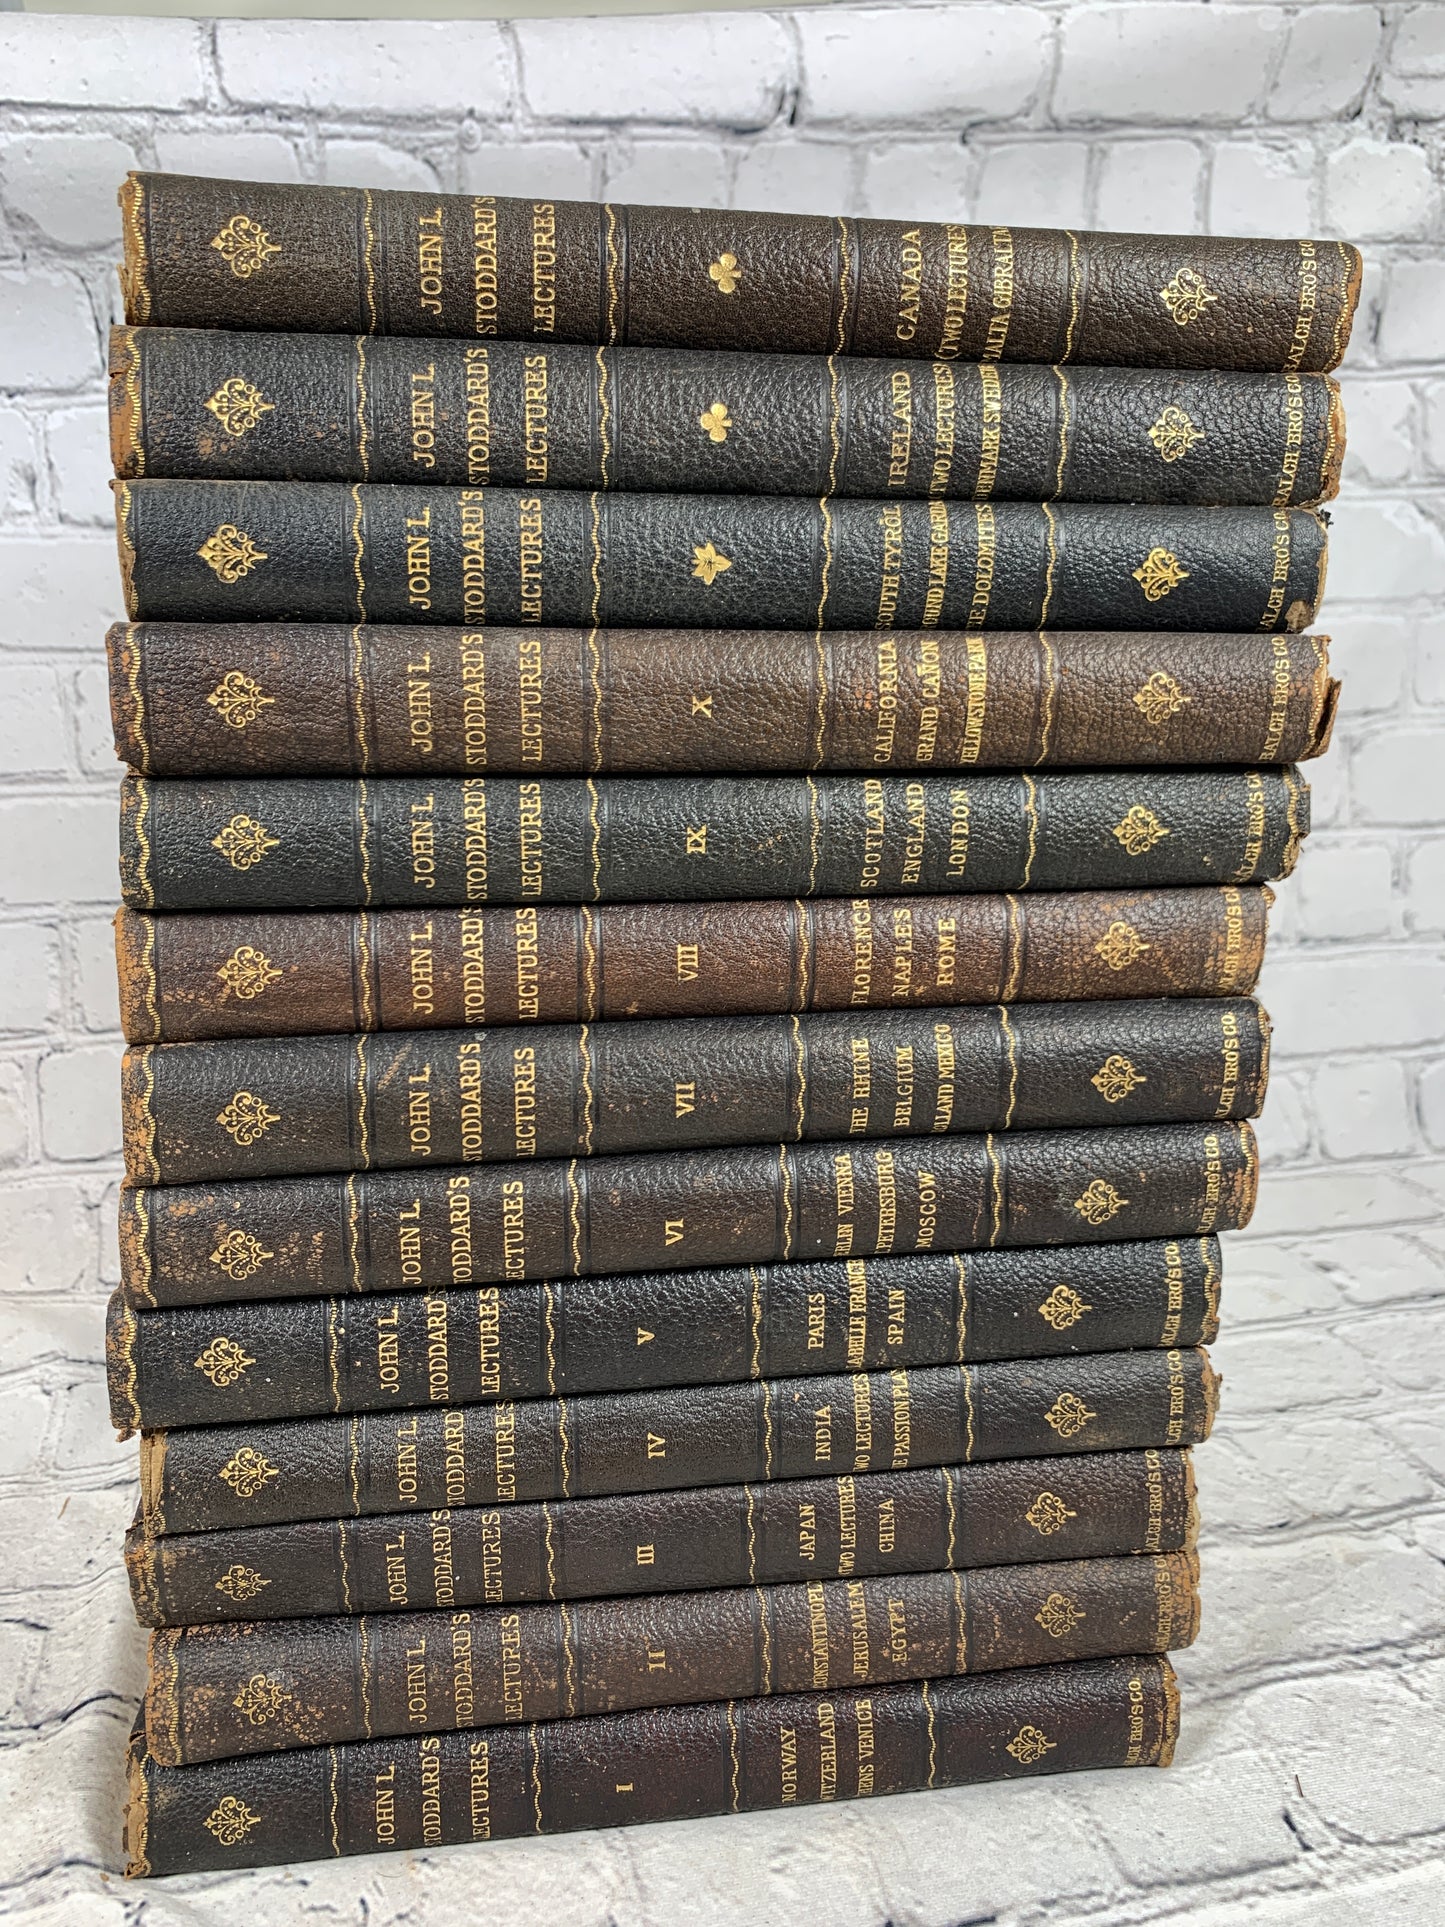 John L. Stoddard's Lectures [Volumes 1-10 and 3 Supplements · 1903]